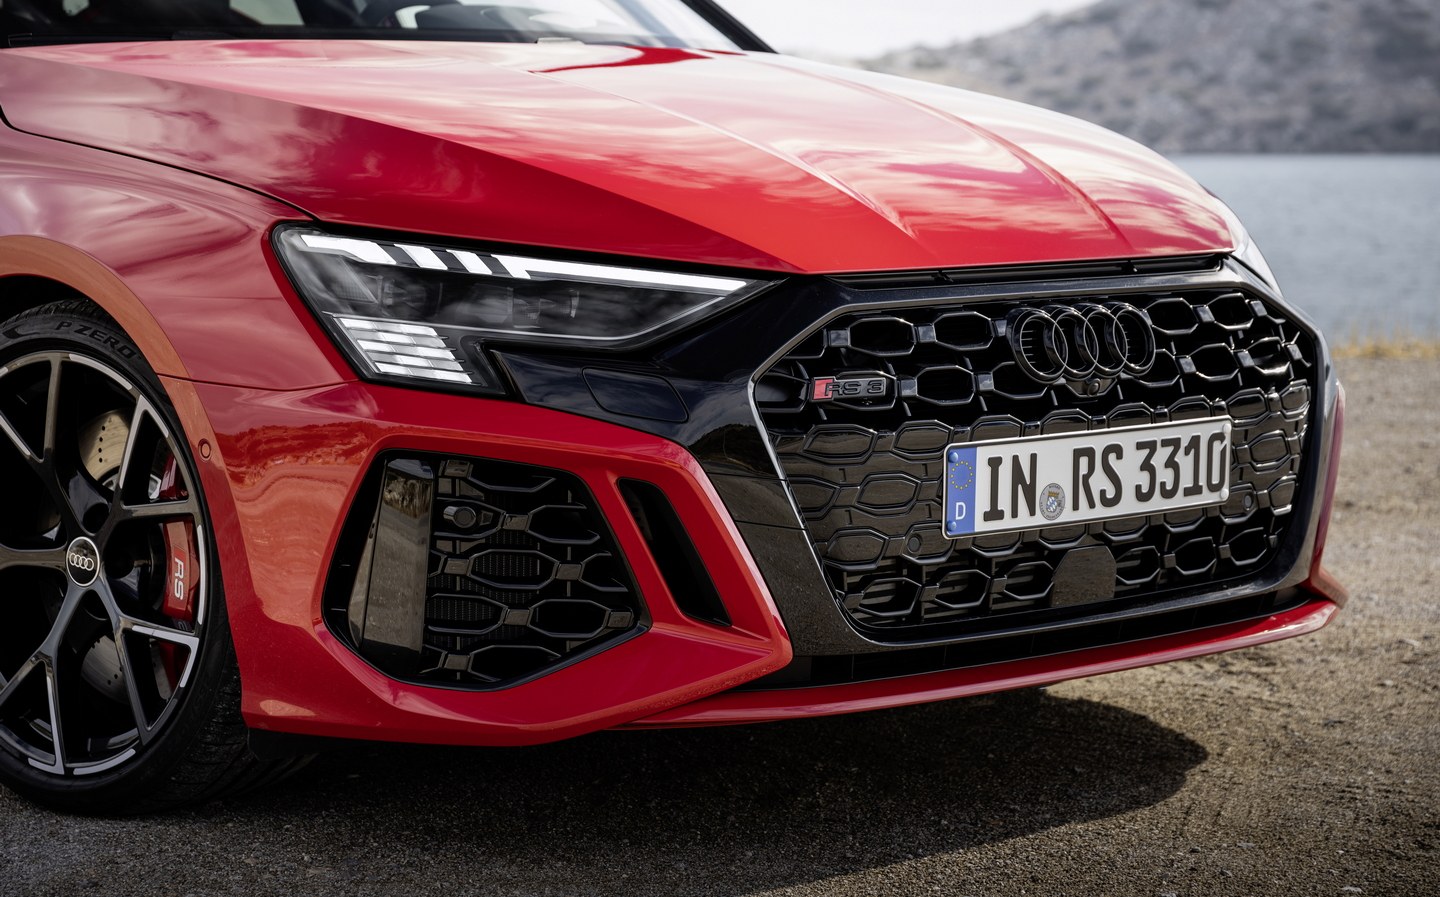 The 2021 Audi RS 3 is outrageously fast but there's a more